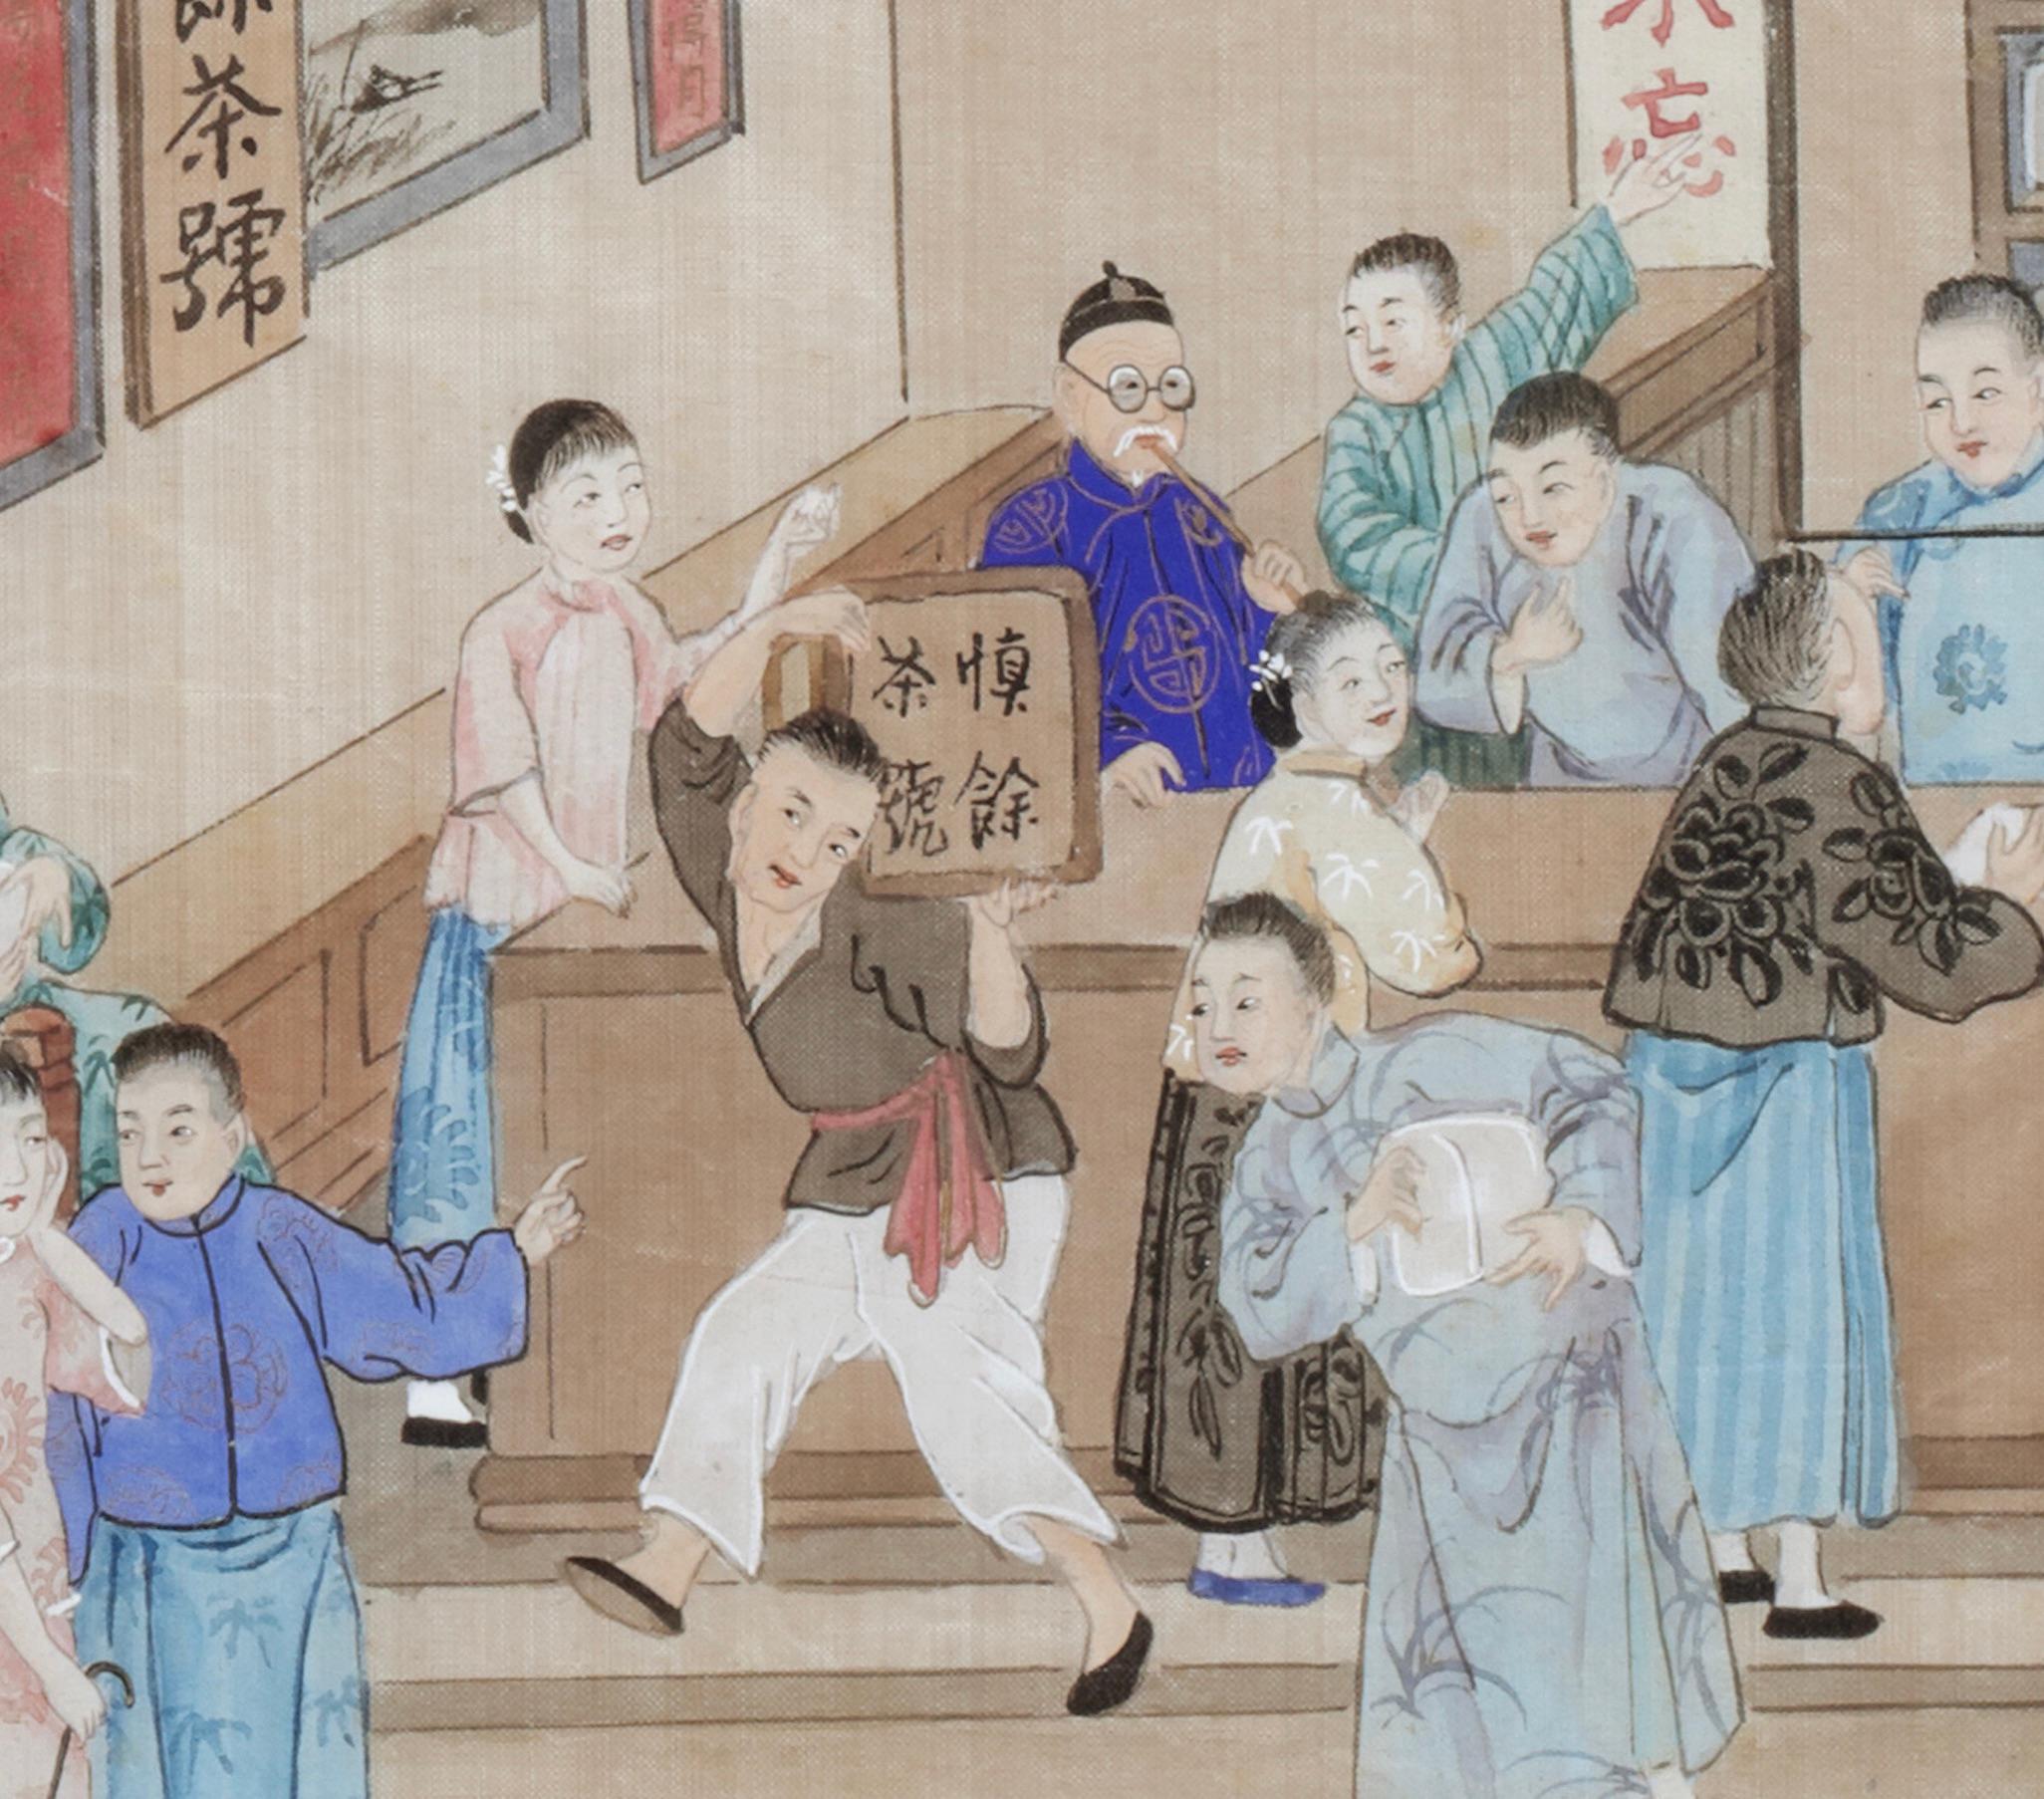 Hand-Painted Chinese Export Trade Painting Depicting ‘the Tea Shop', Chinoiserie Chique For Sale